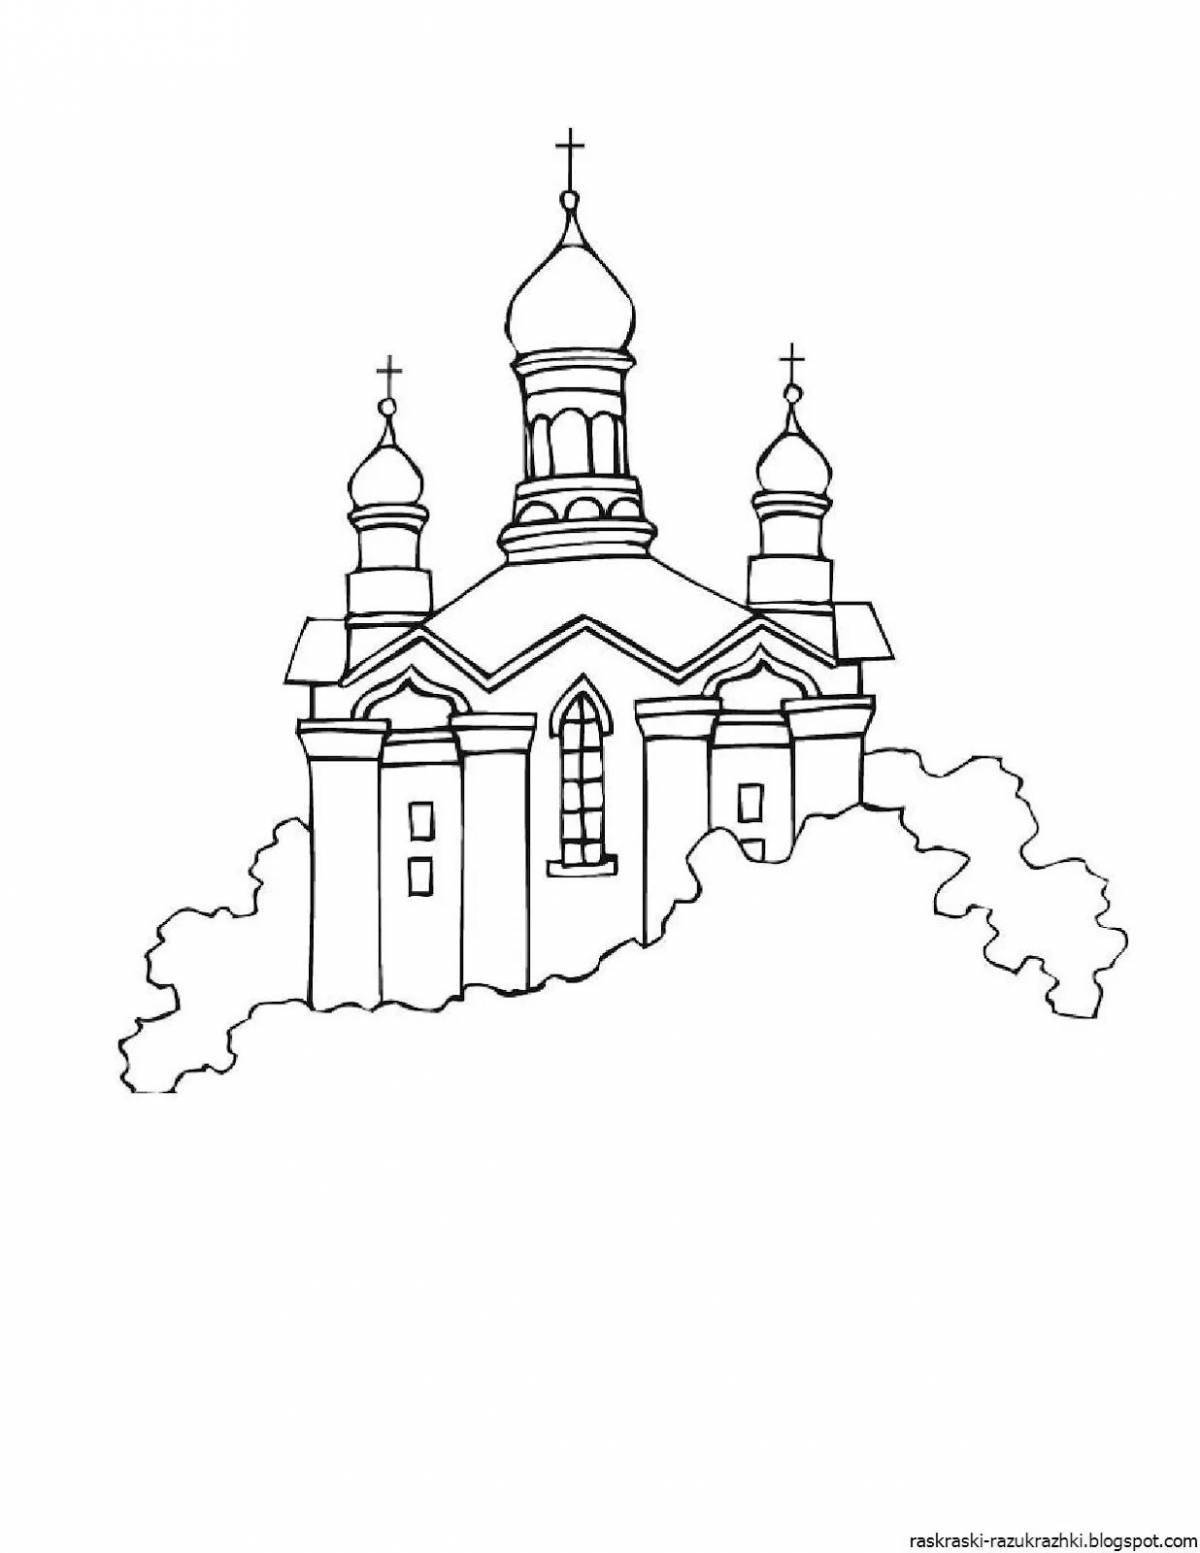 Coloring dome church for children